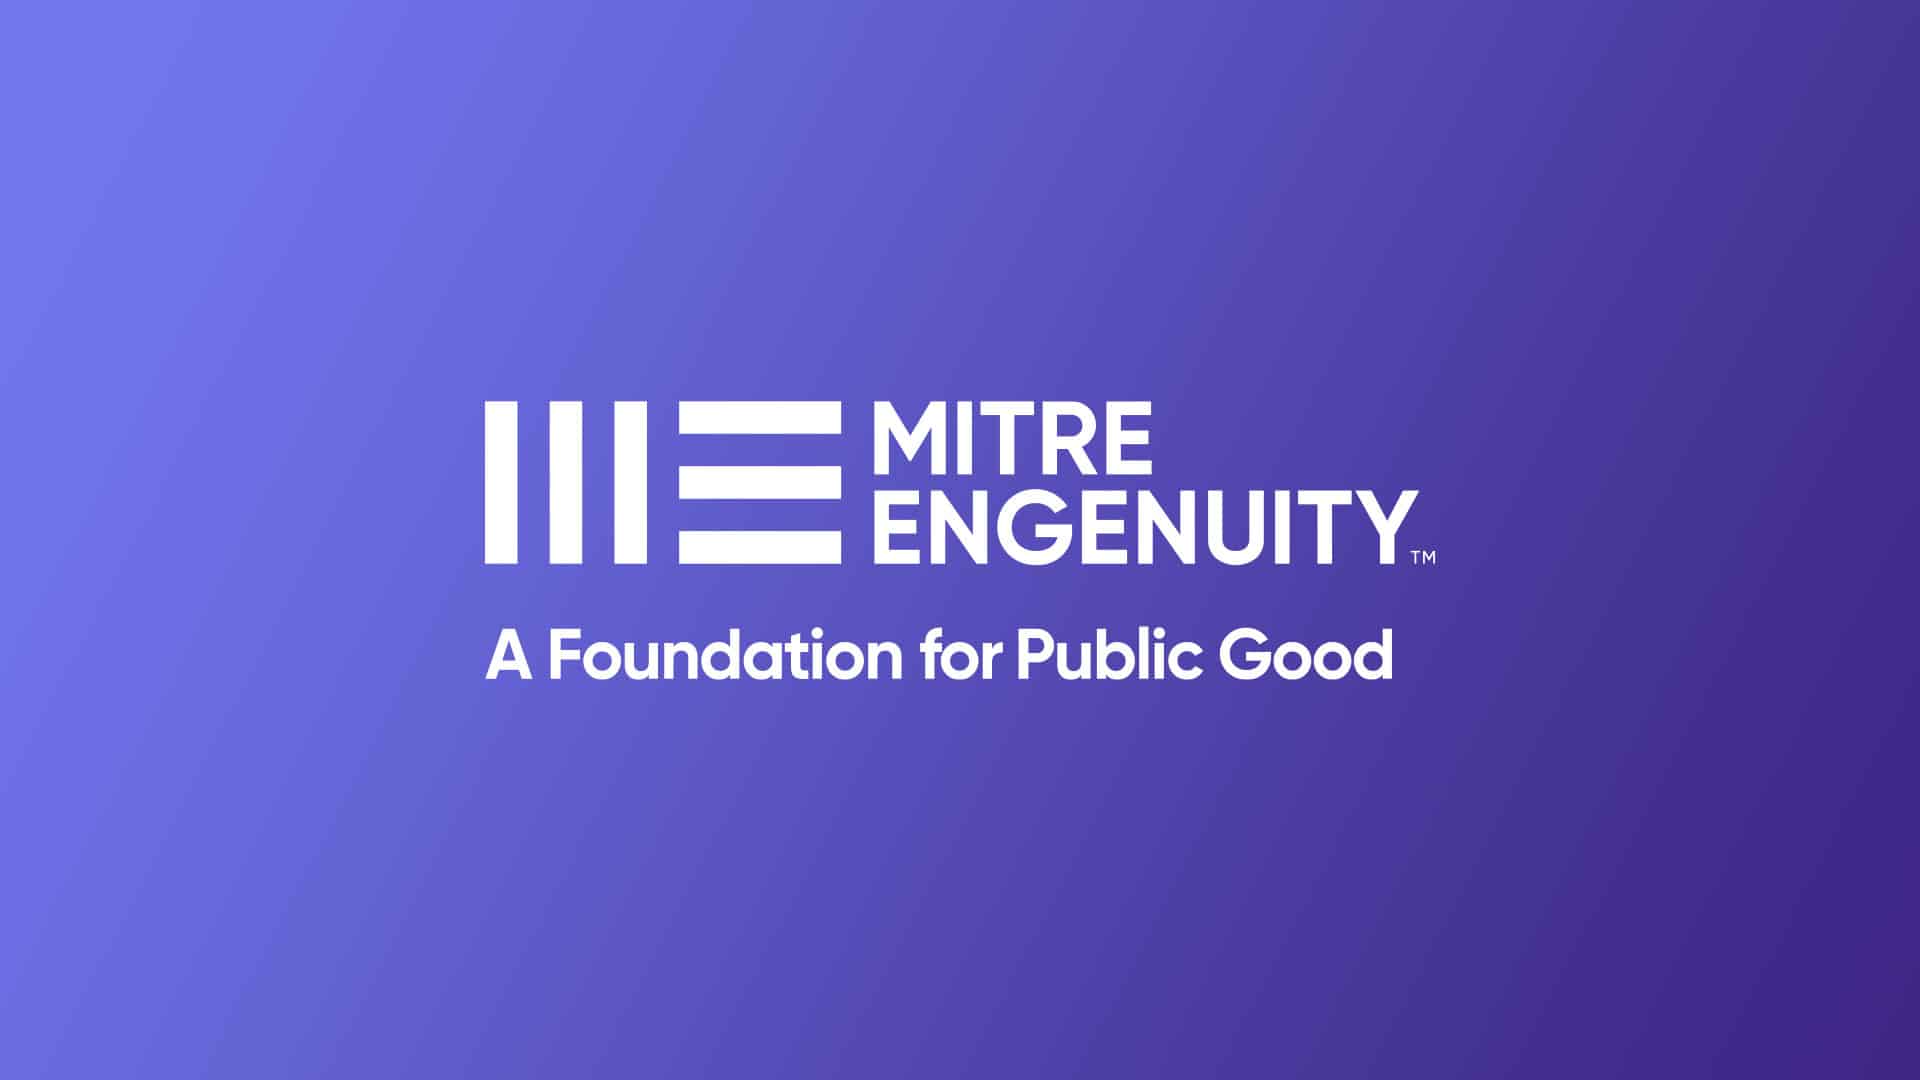 MITRE Engenuity Is a Famous Evaluation Firm That Analyses the Effectiveness of Cybersecurity Solutions and Products